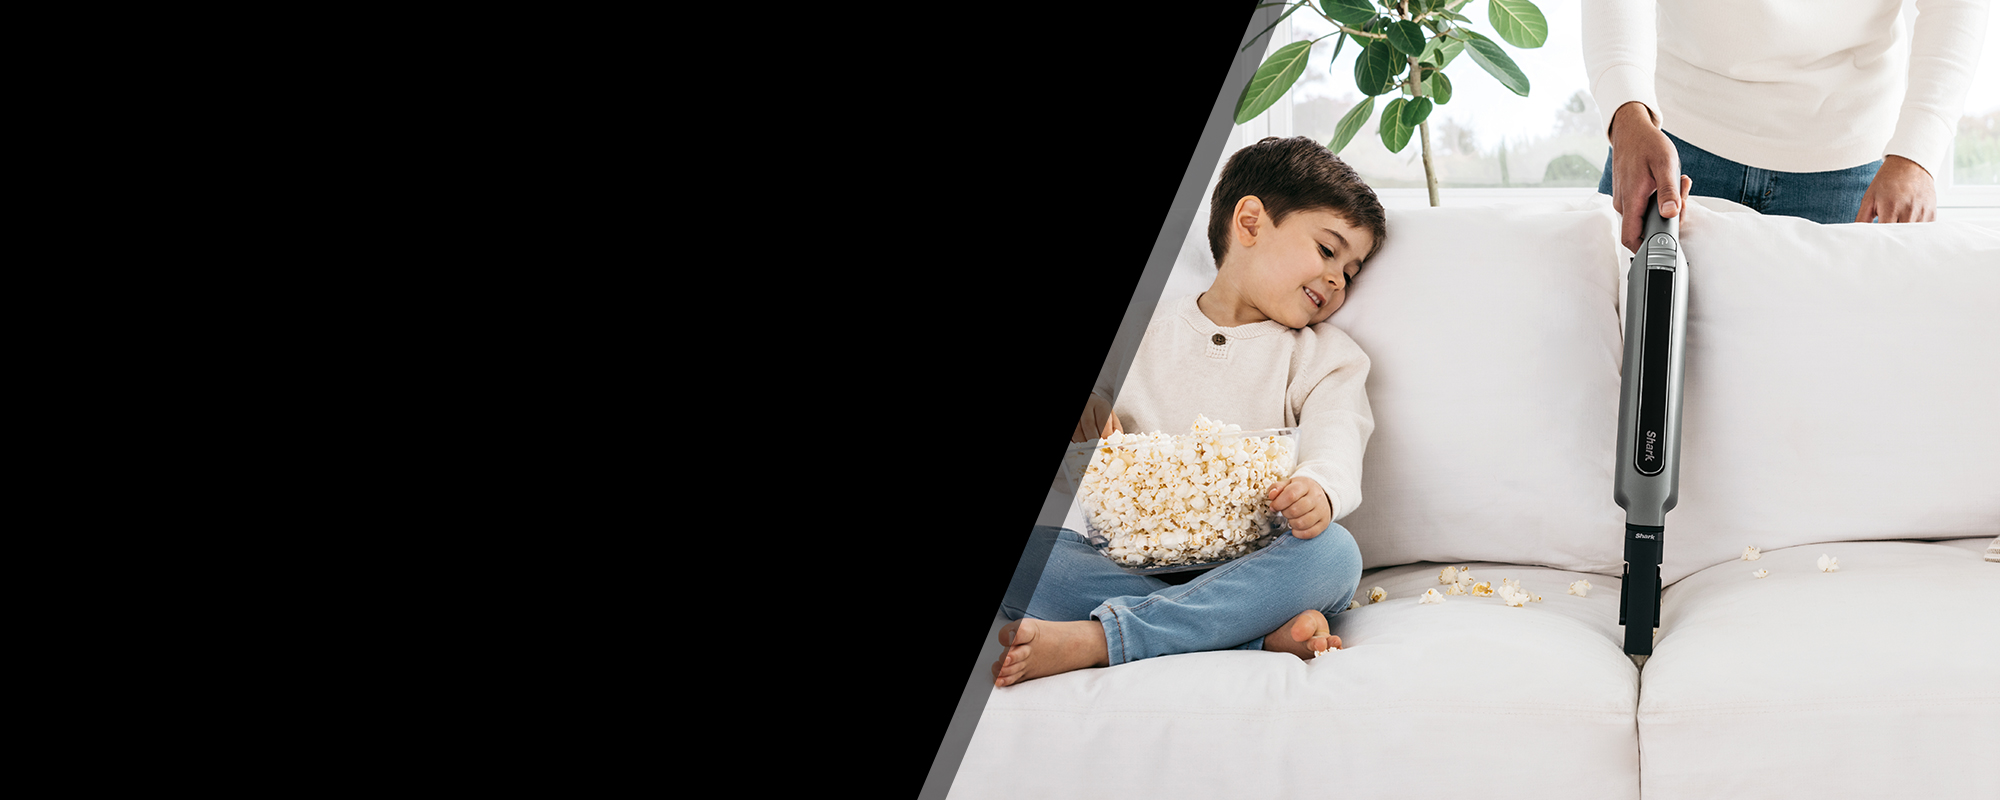 Shark handheld vacuuming split popcorn from couch next to child